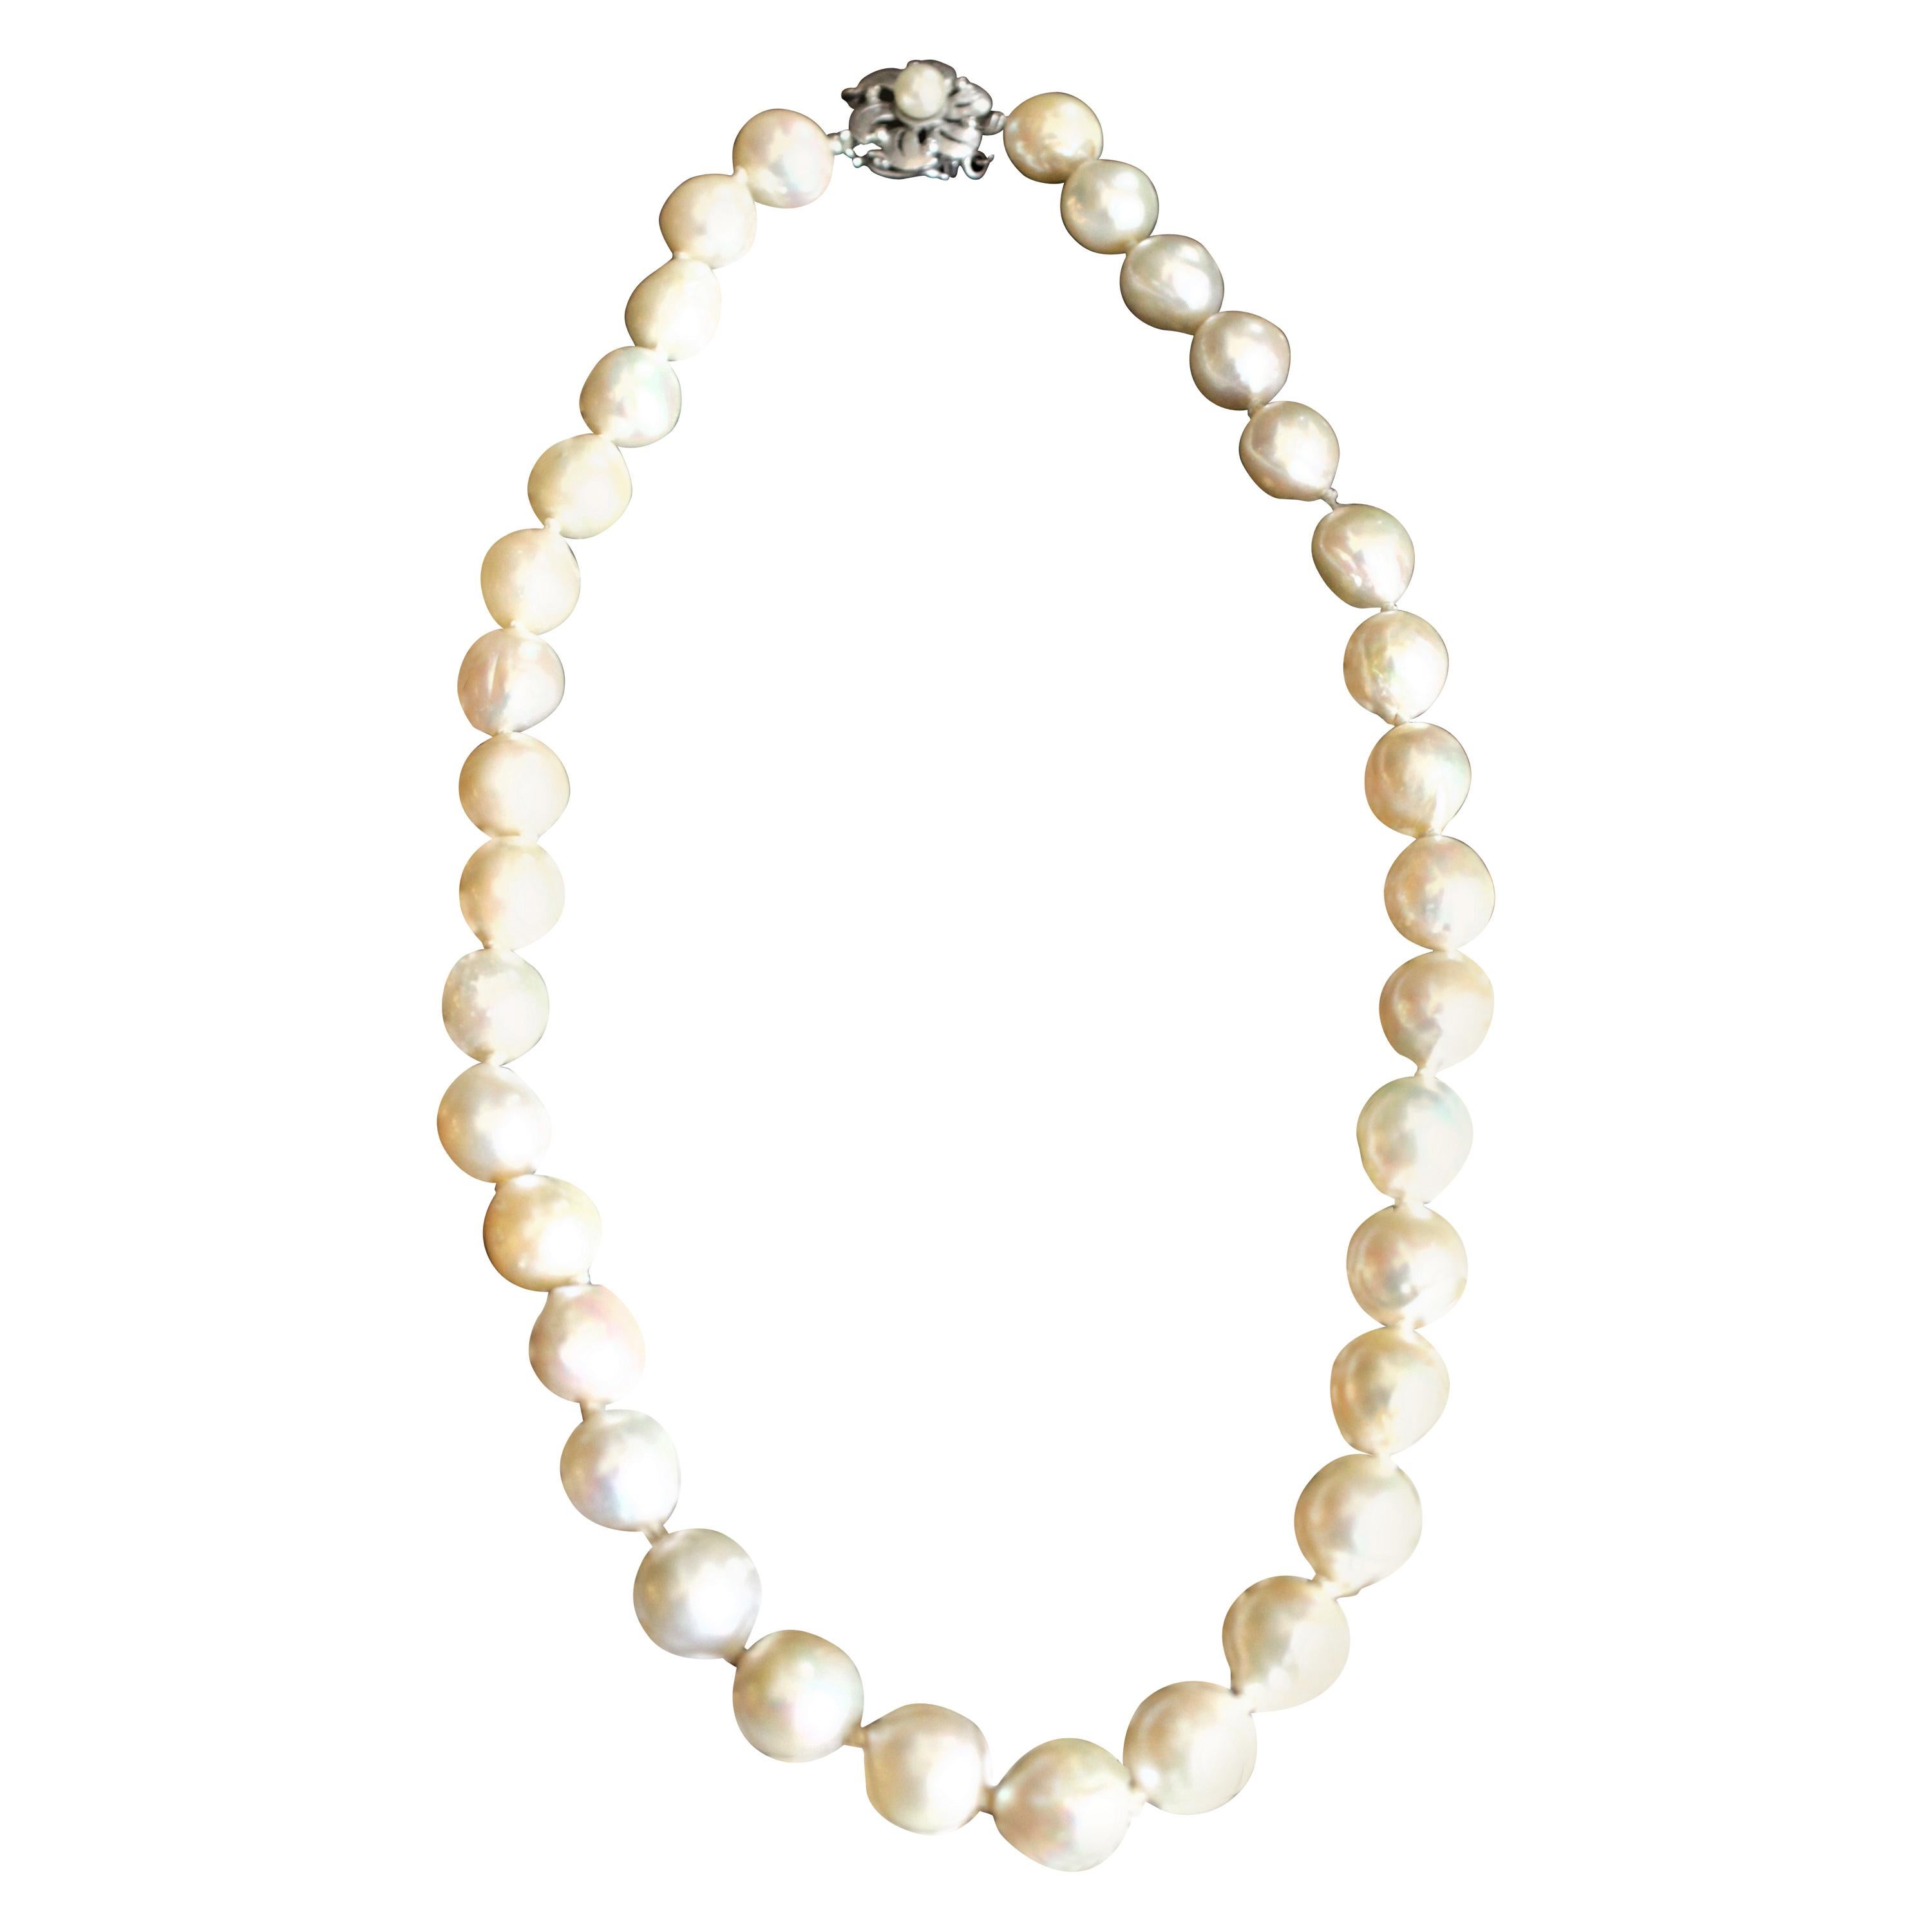 Women's Large Cultured Pearl Choker Necklace with a 14-Karat White Gold Clasp